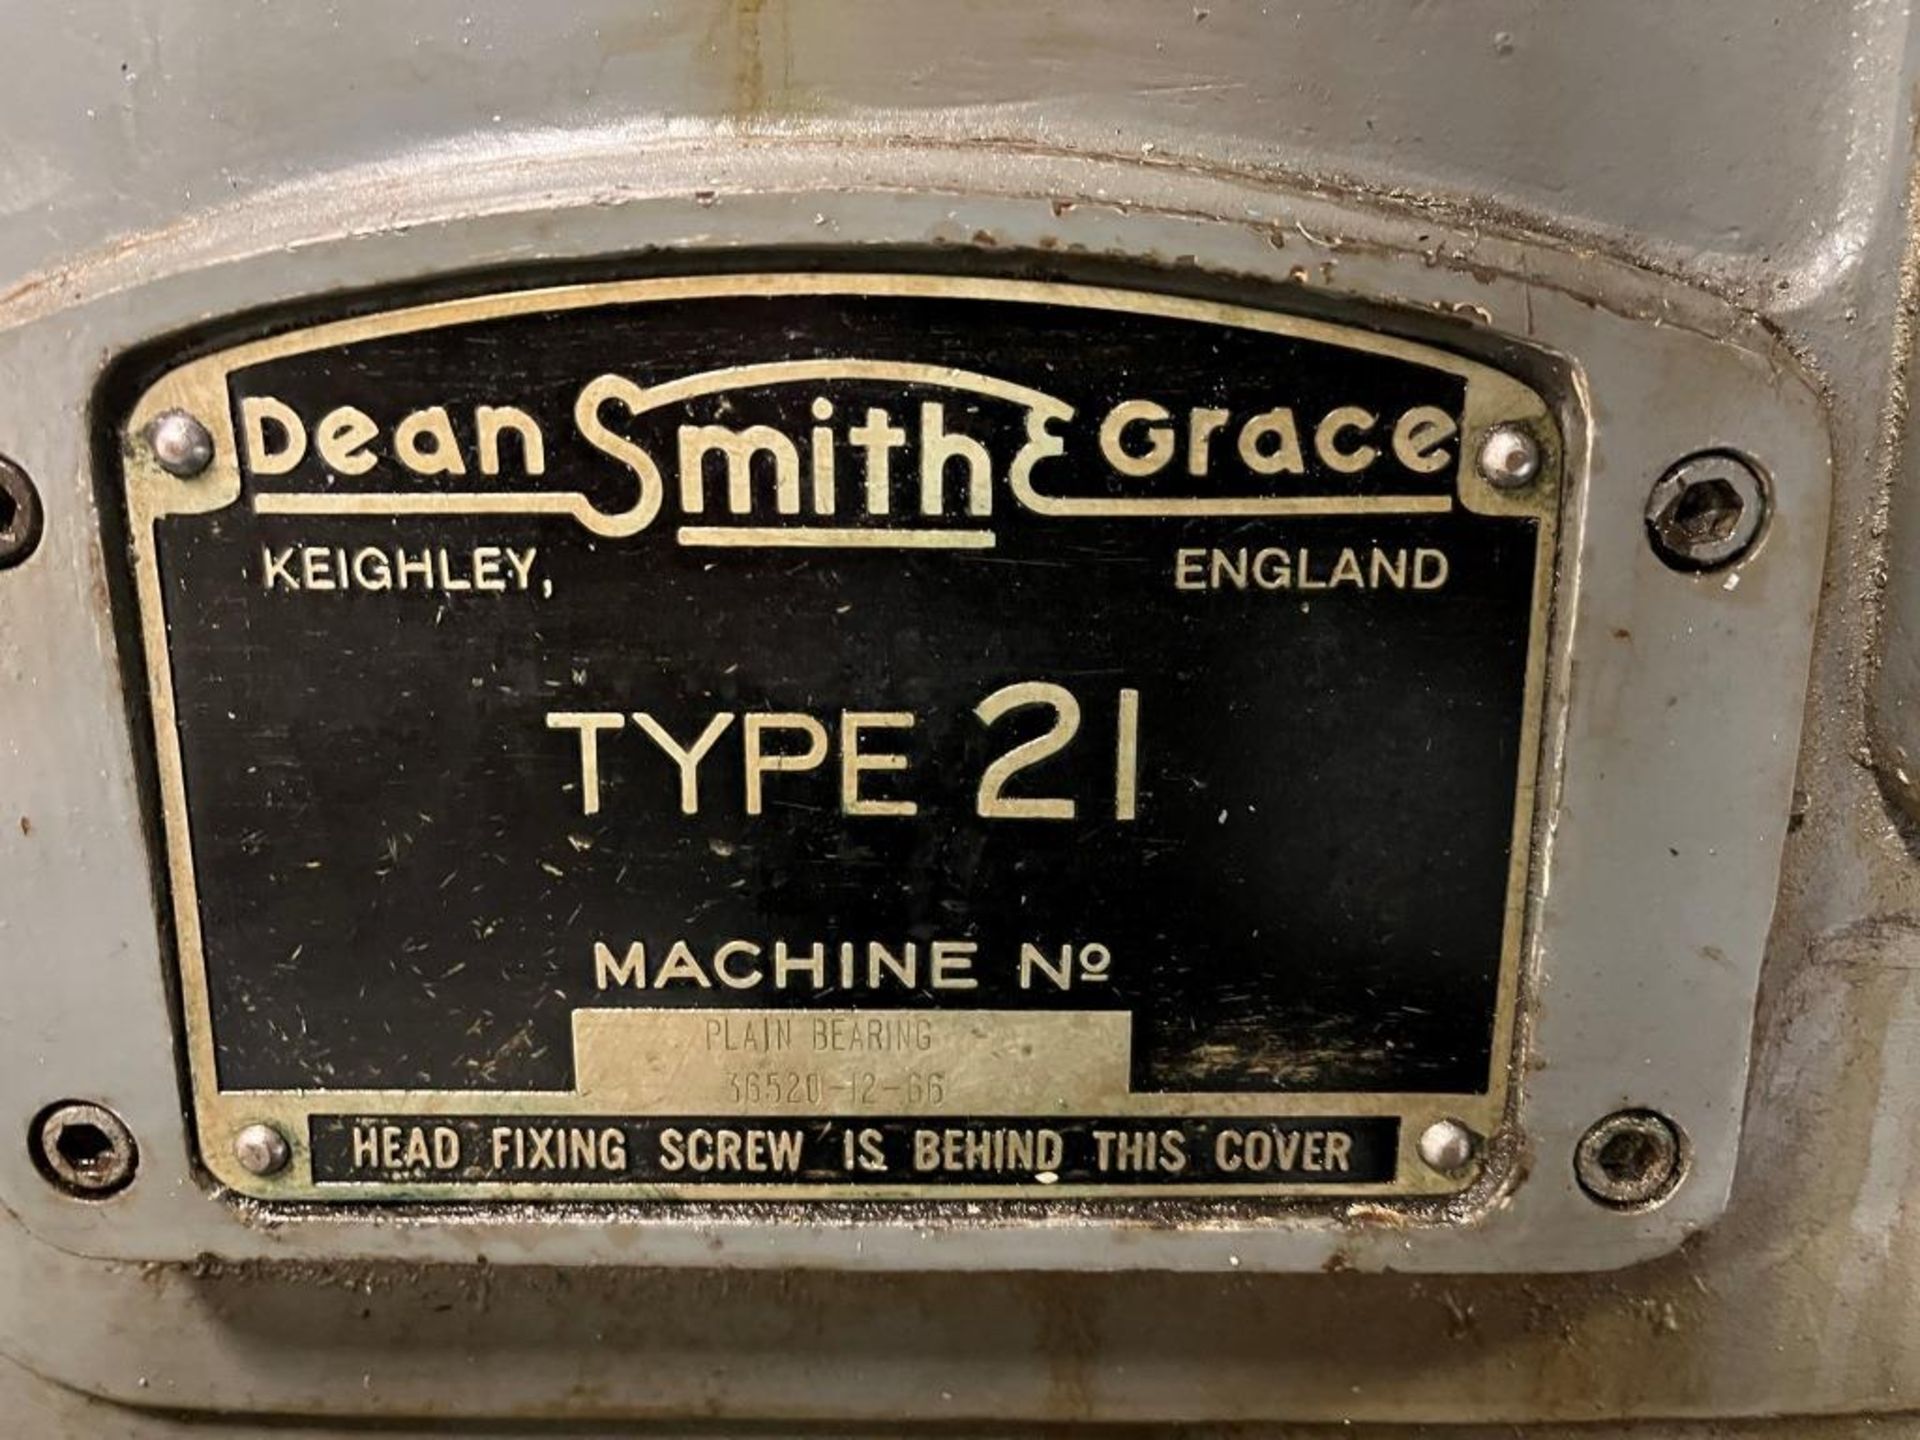 Dean Smith & Grace gap bed lathe, 21 x 60, type 21, Serial No. Plain Bearing 36520-12-66, Please - Image 5 of 11